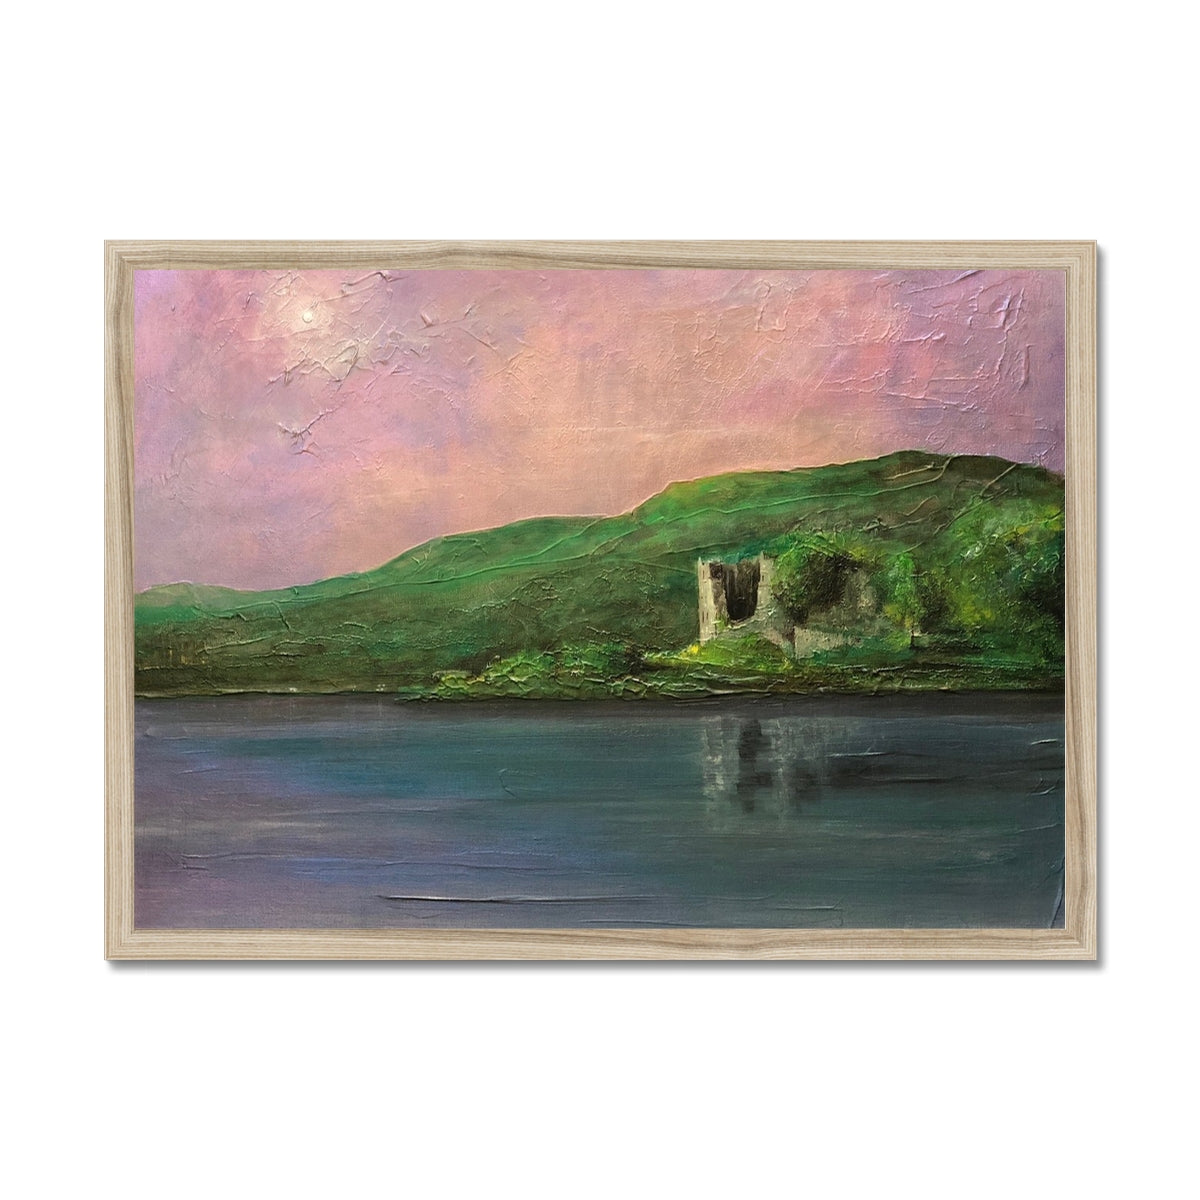 Old Castle Lachlan Painting | Framed Prints From Scotland-Framed Prints-Historic & Iconic Scotland Art Gallery-A2 Landscape-Natural Frame-Paintings, Prints, Homeware, Art Gifts From Scotland By Scottish Artist Kevin Hunter